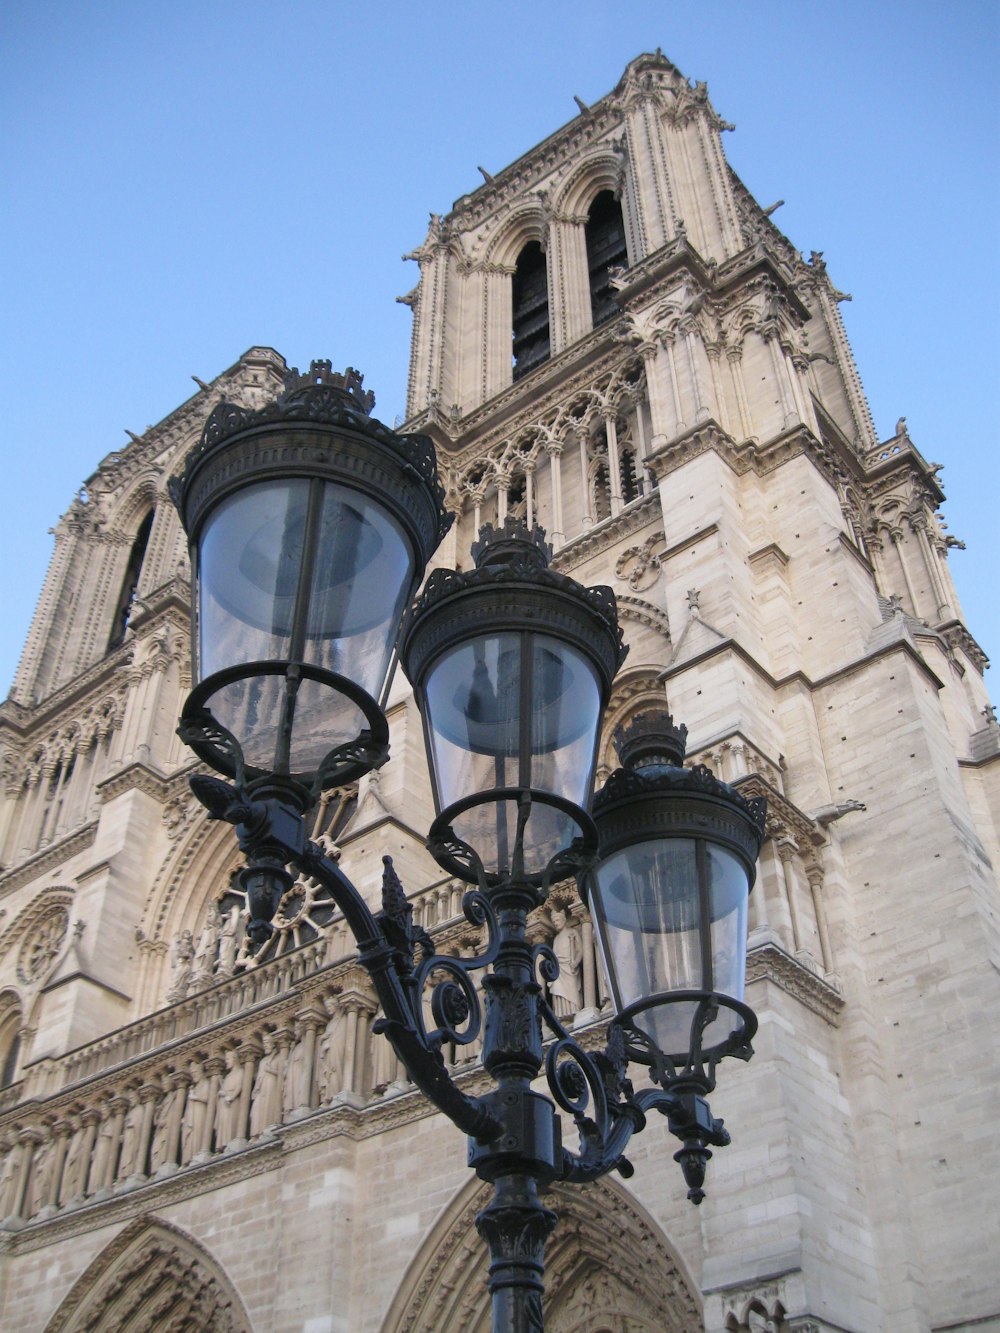 a street light in front of a large building